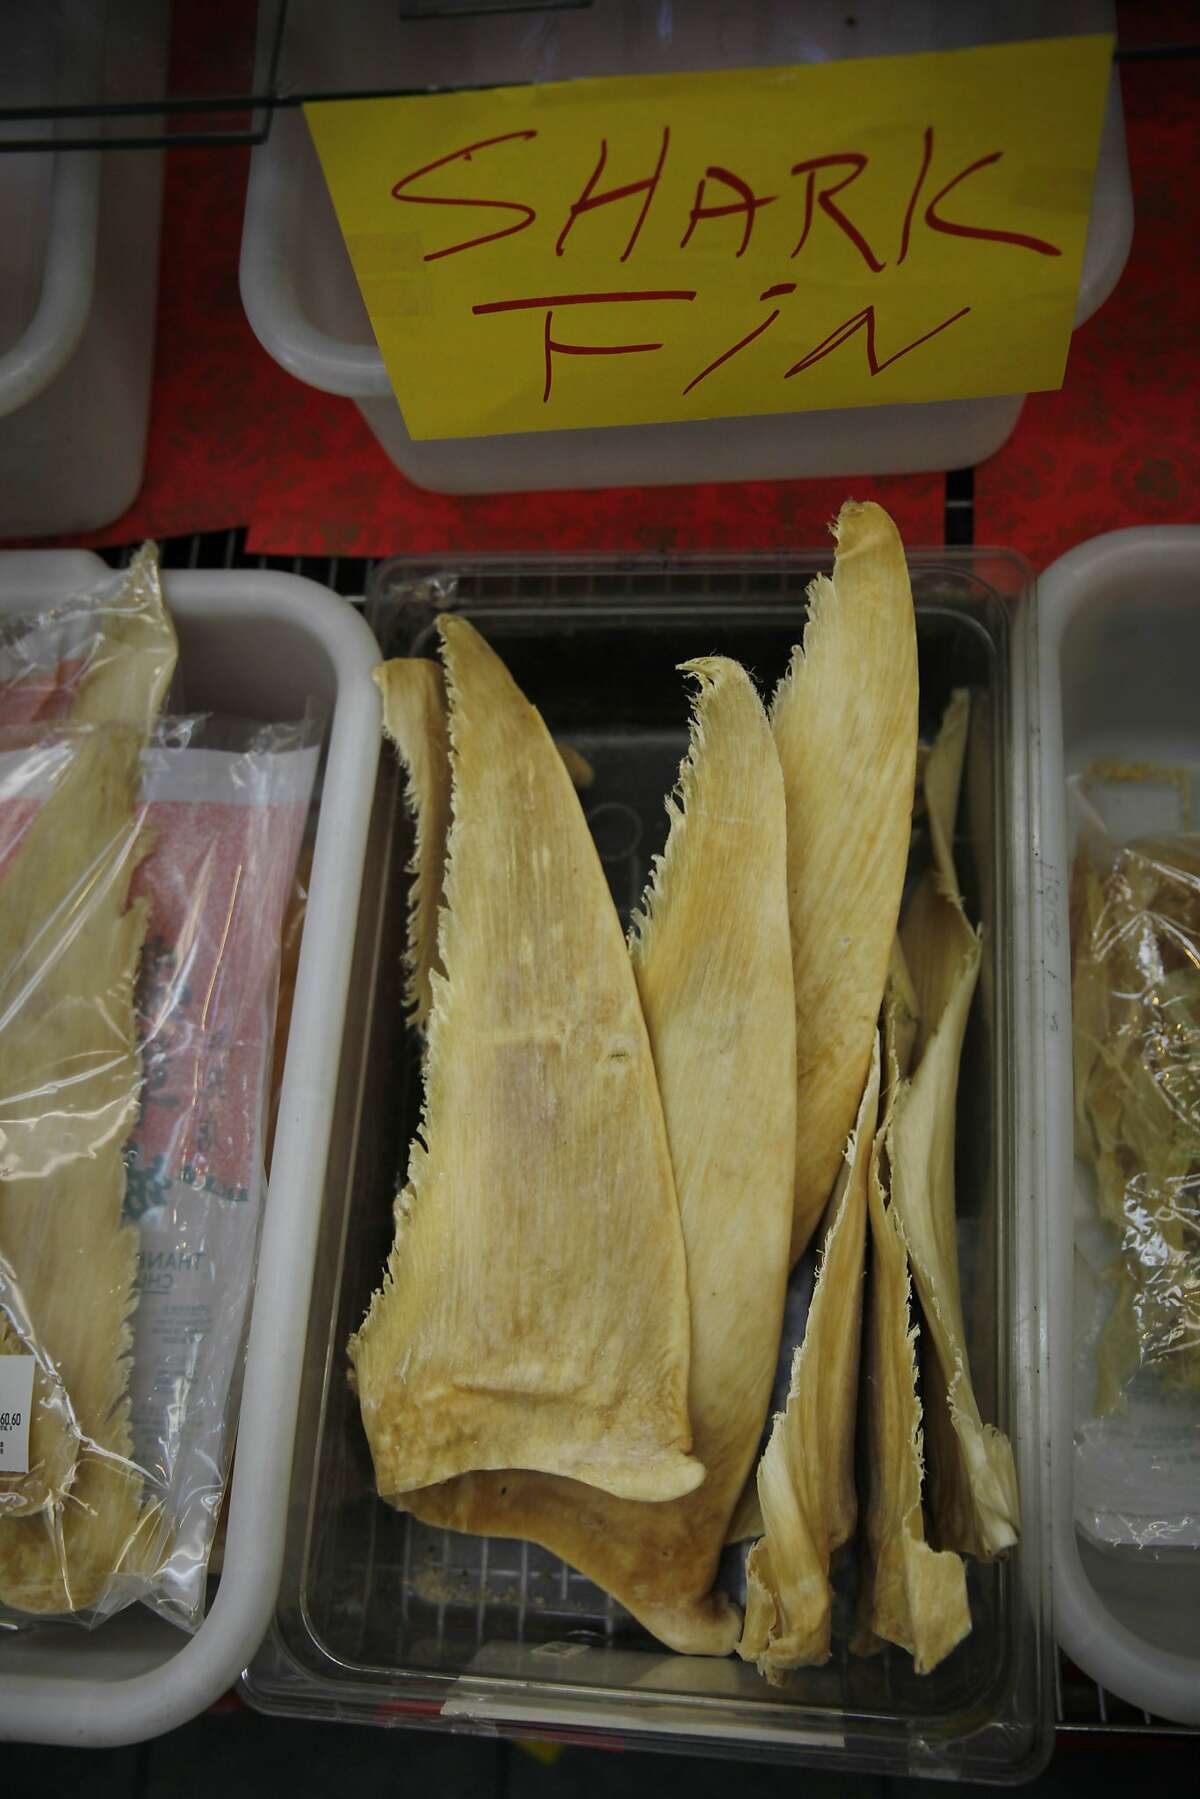 A bins filled with shark fin is seen at Chung Chou City on Friday, June 28, 2013 in San Francisco, Calif. On Monday, it will be illegal to buy, sell or possess shark fin but not shark bone.